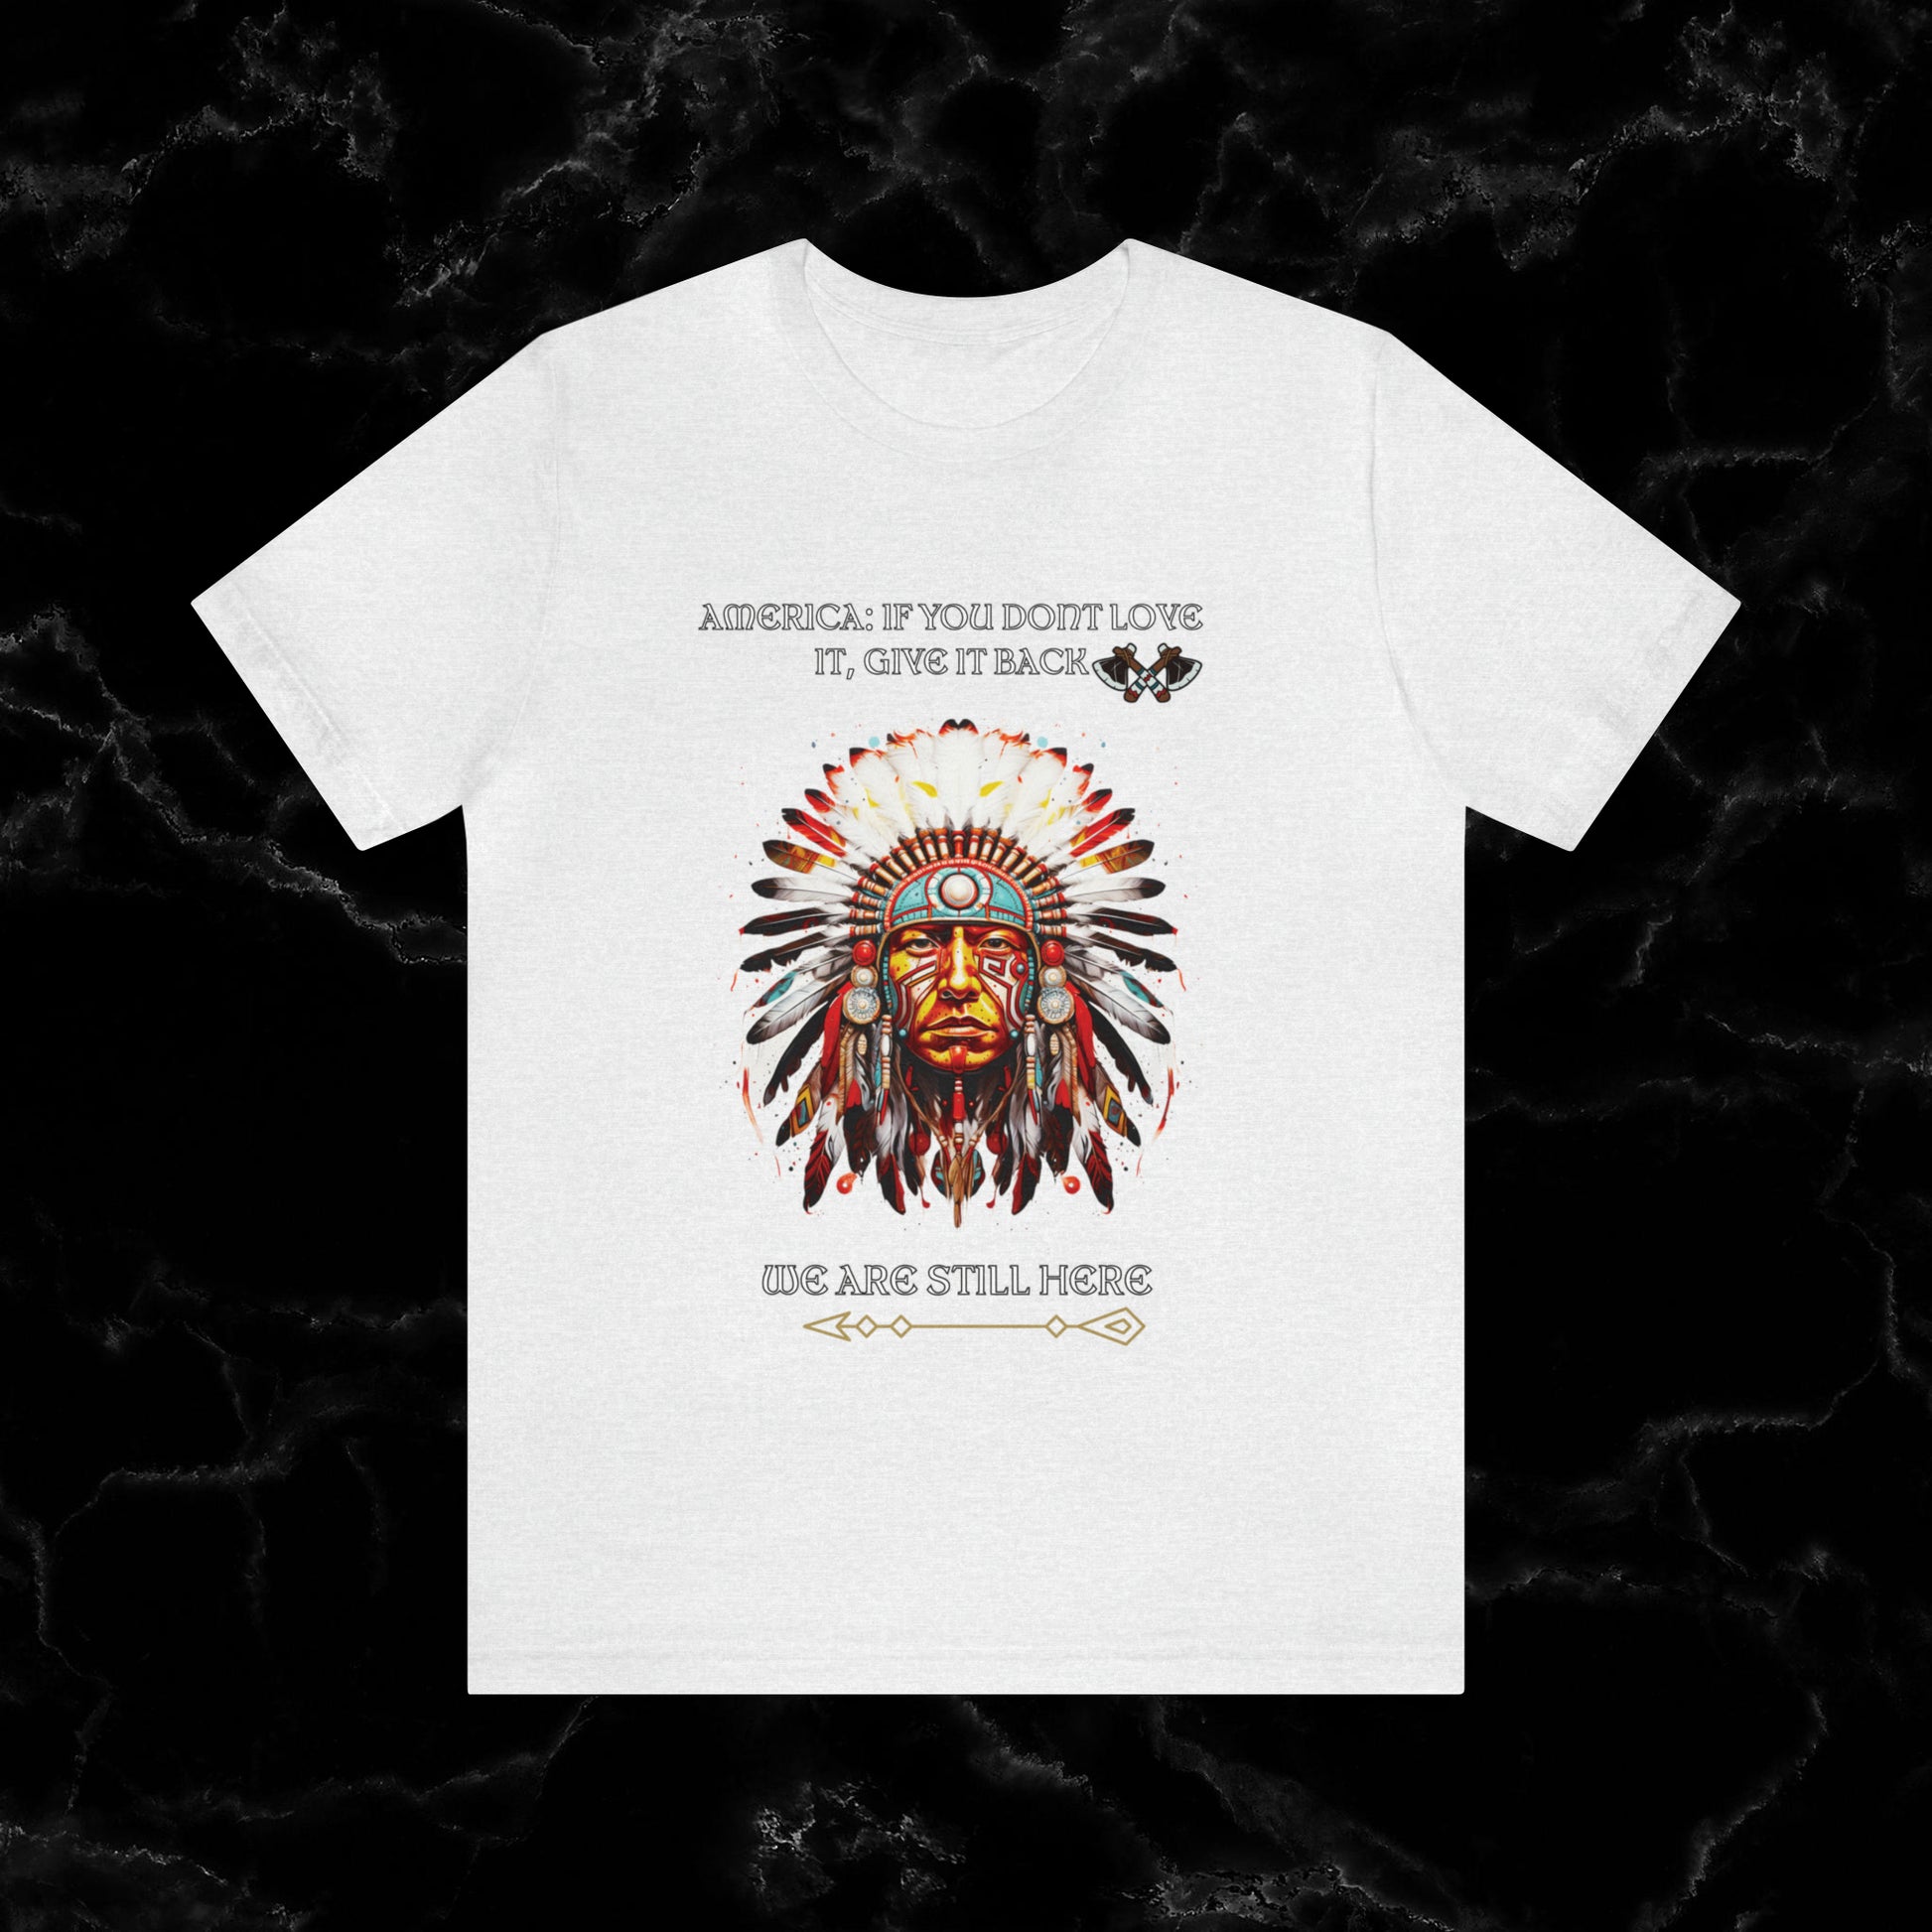 America Love it Or Give It Back Vintage T-Shirt - Indigenous Native Shirt T-Shirt Ash S 